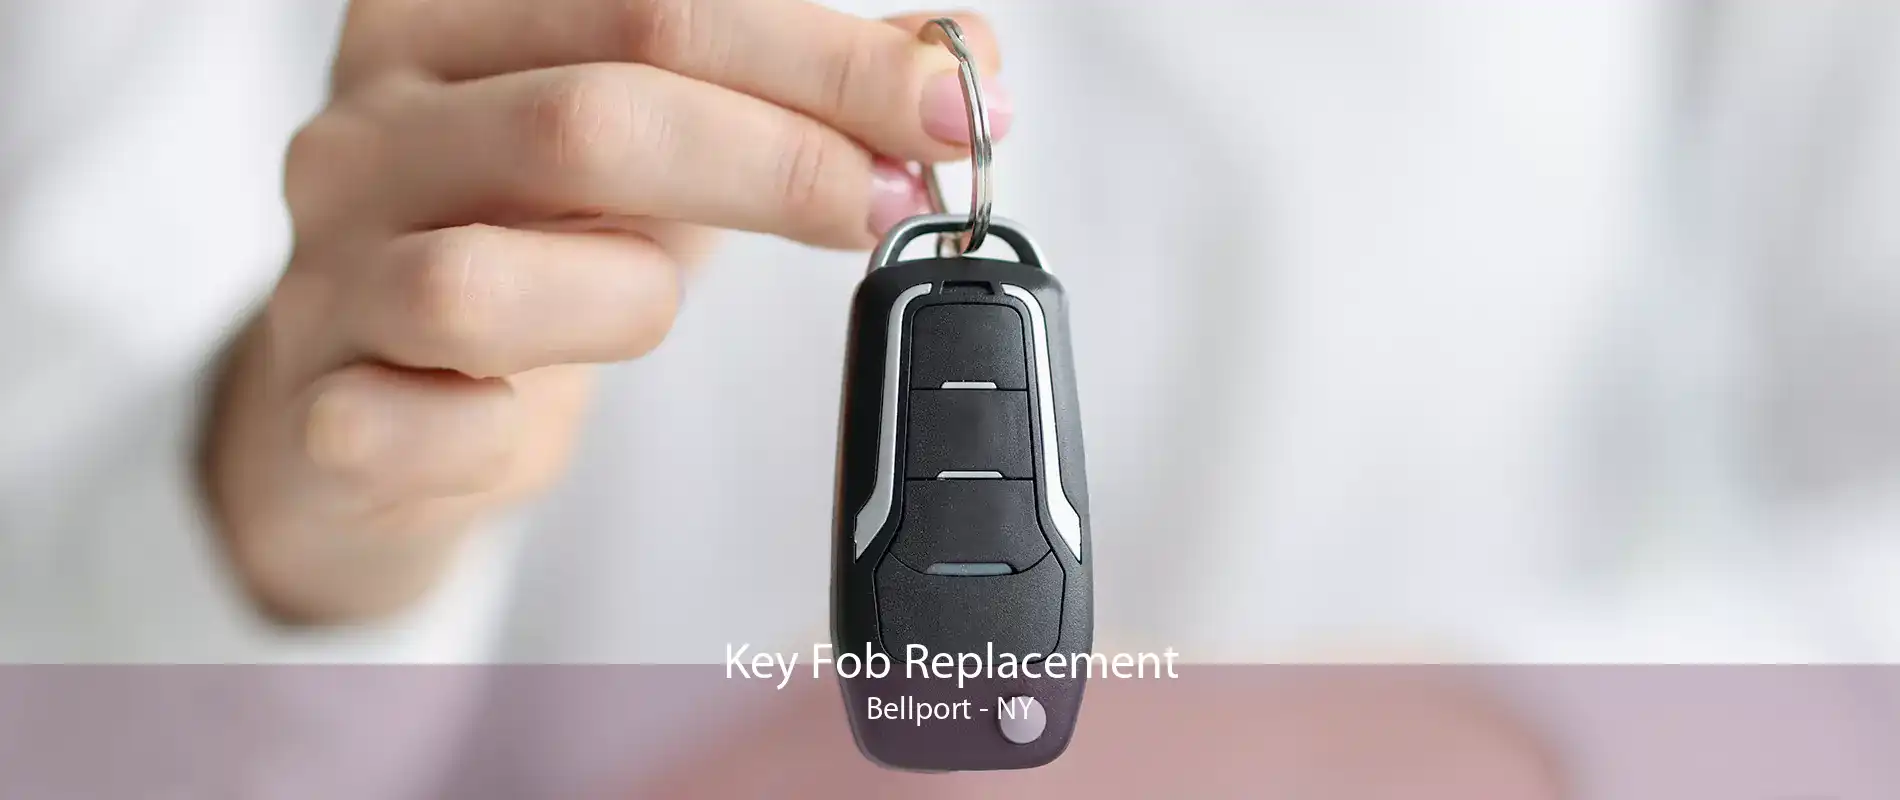 Key Fob Replacement Bellport - NY